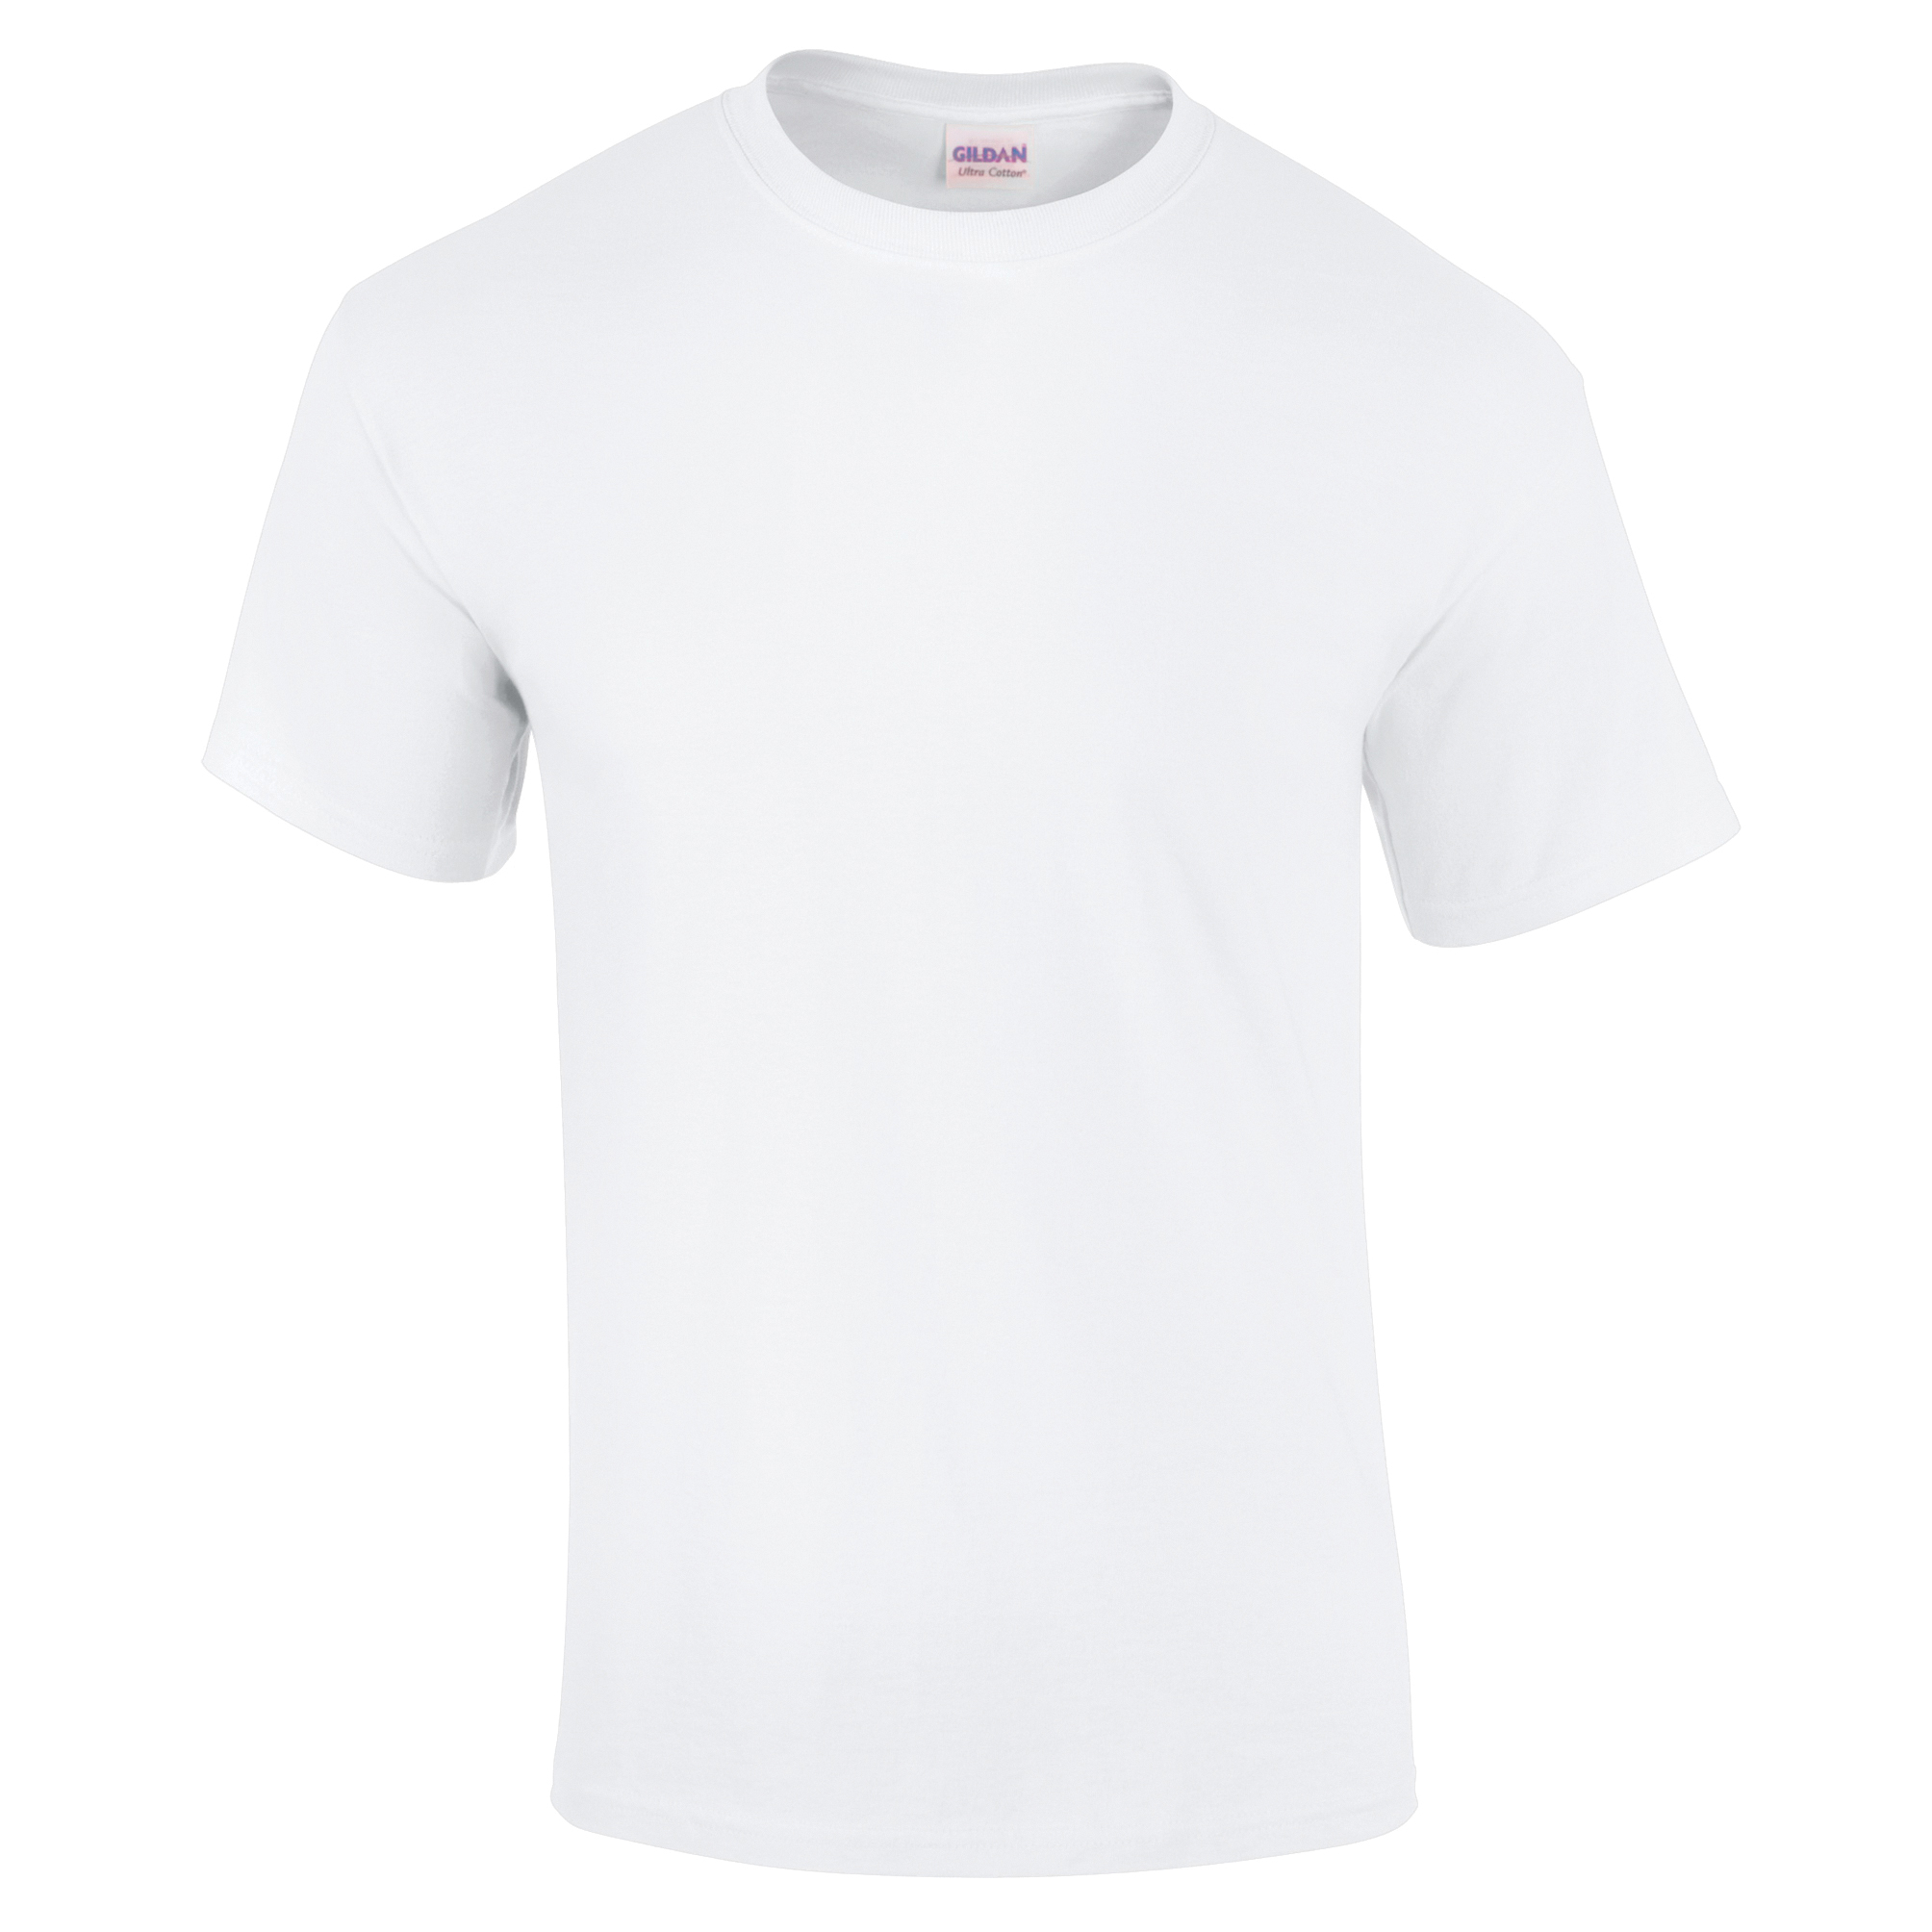 ax-httpswebsystems.s3.amazonaws.comtmp_for_downloadultra-cotton-white.jpg